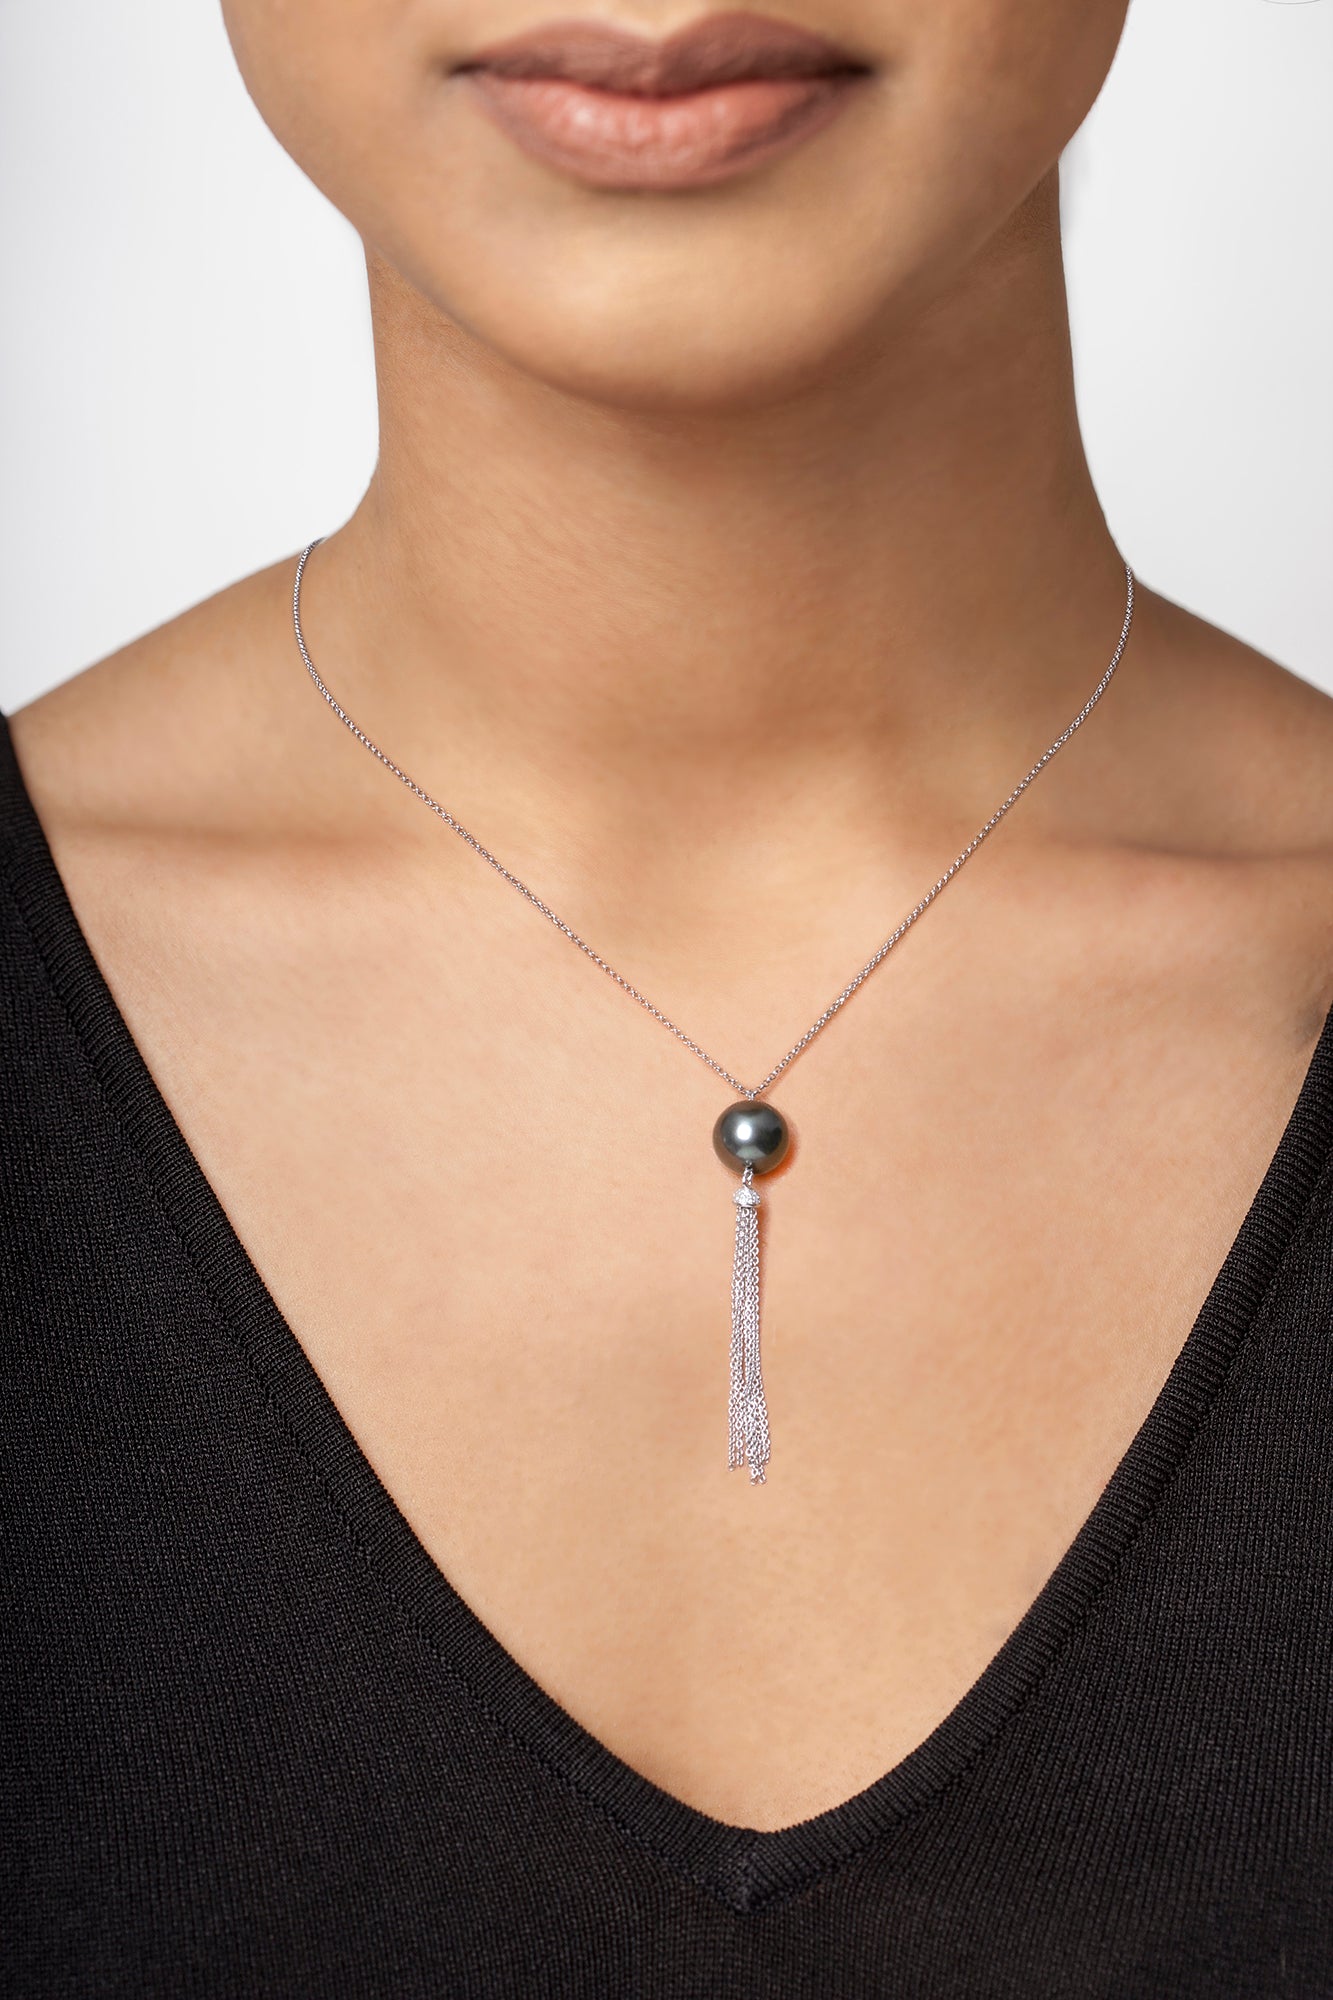 The Tahitian Tassel Necklace- 40% OFF!